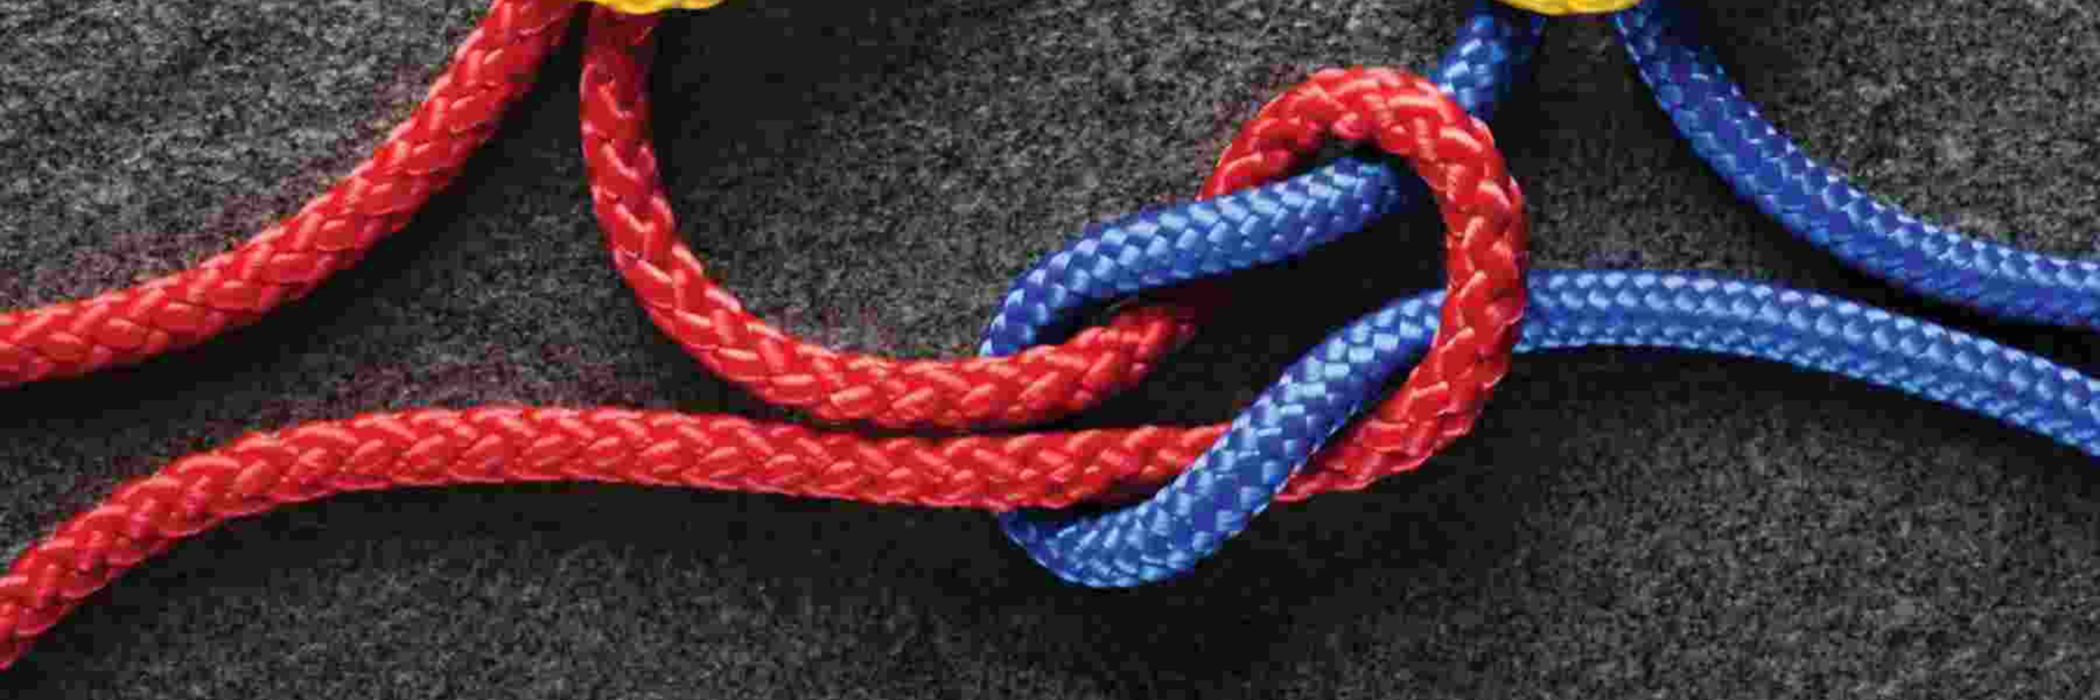 KPMG IFRS business combinations feedback article image: colourful ropes hitched together